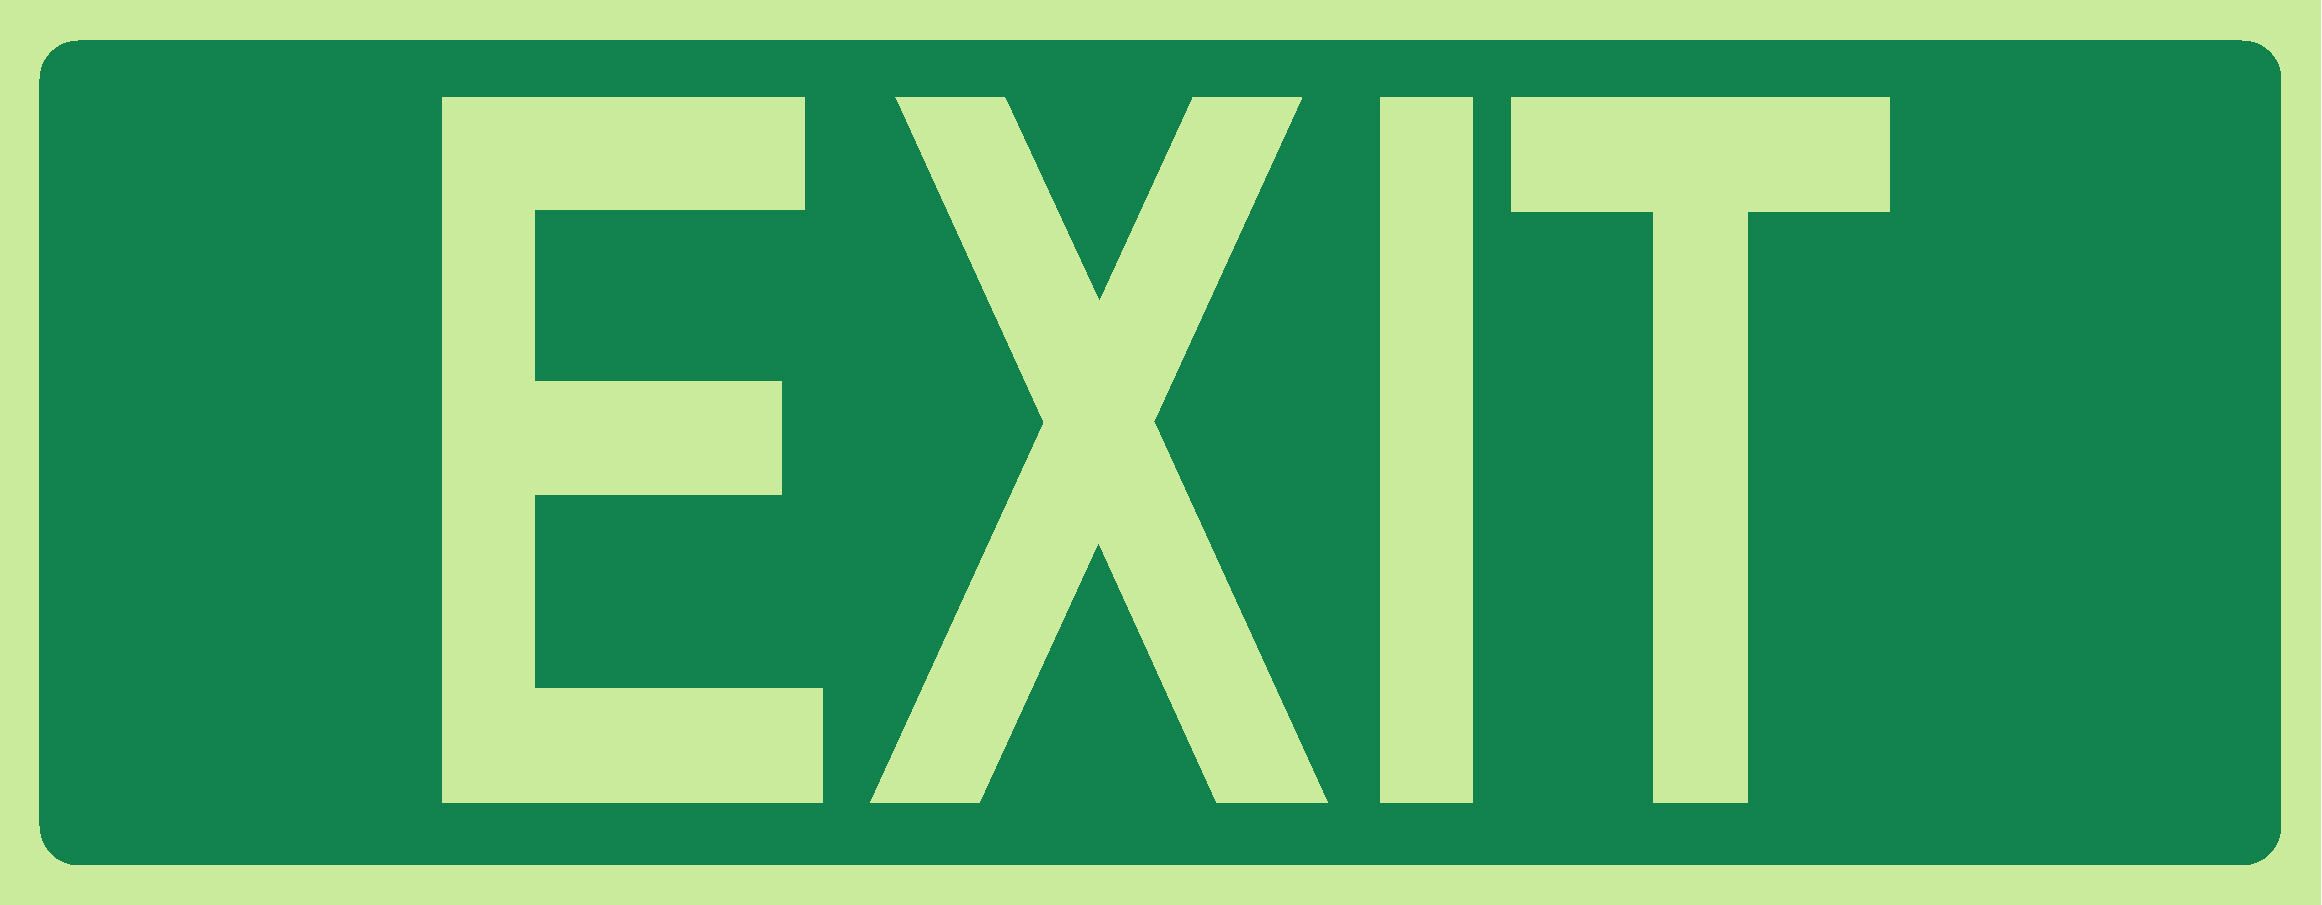 DIRECTIONAL EXIT